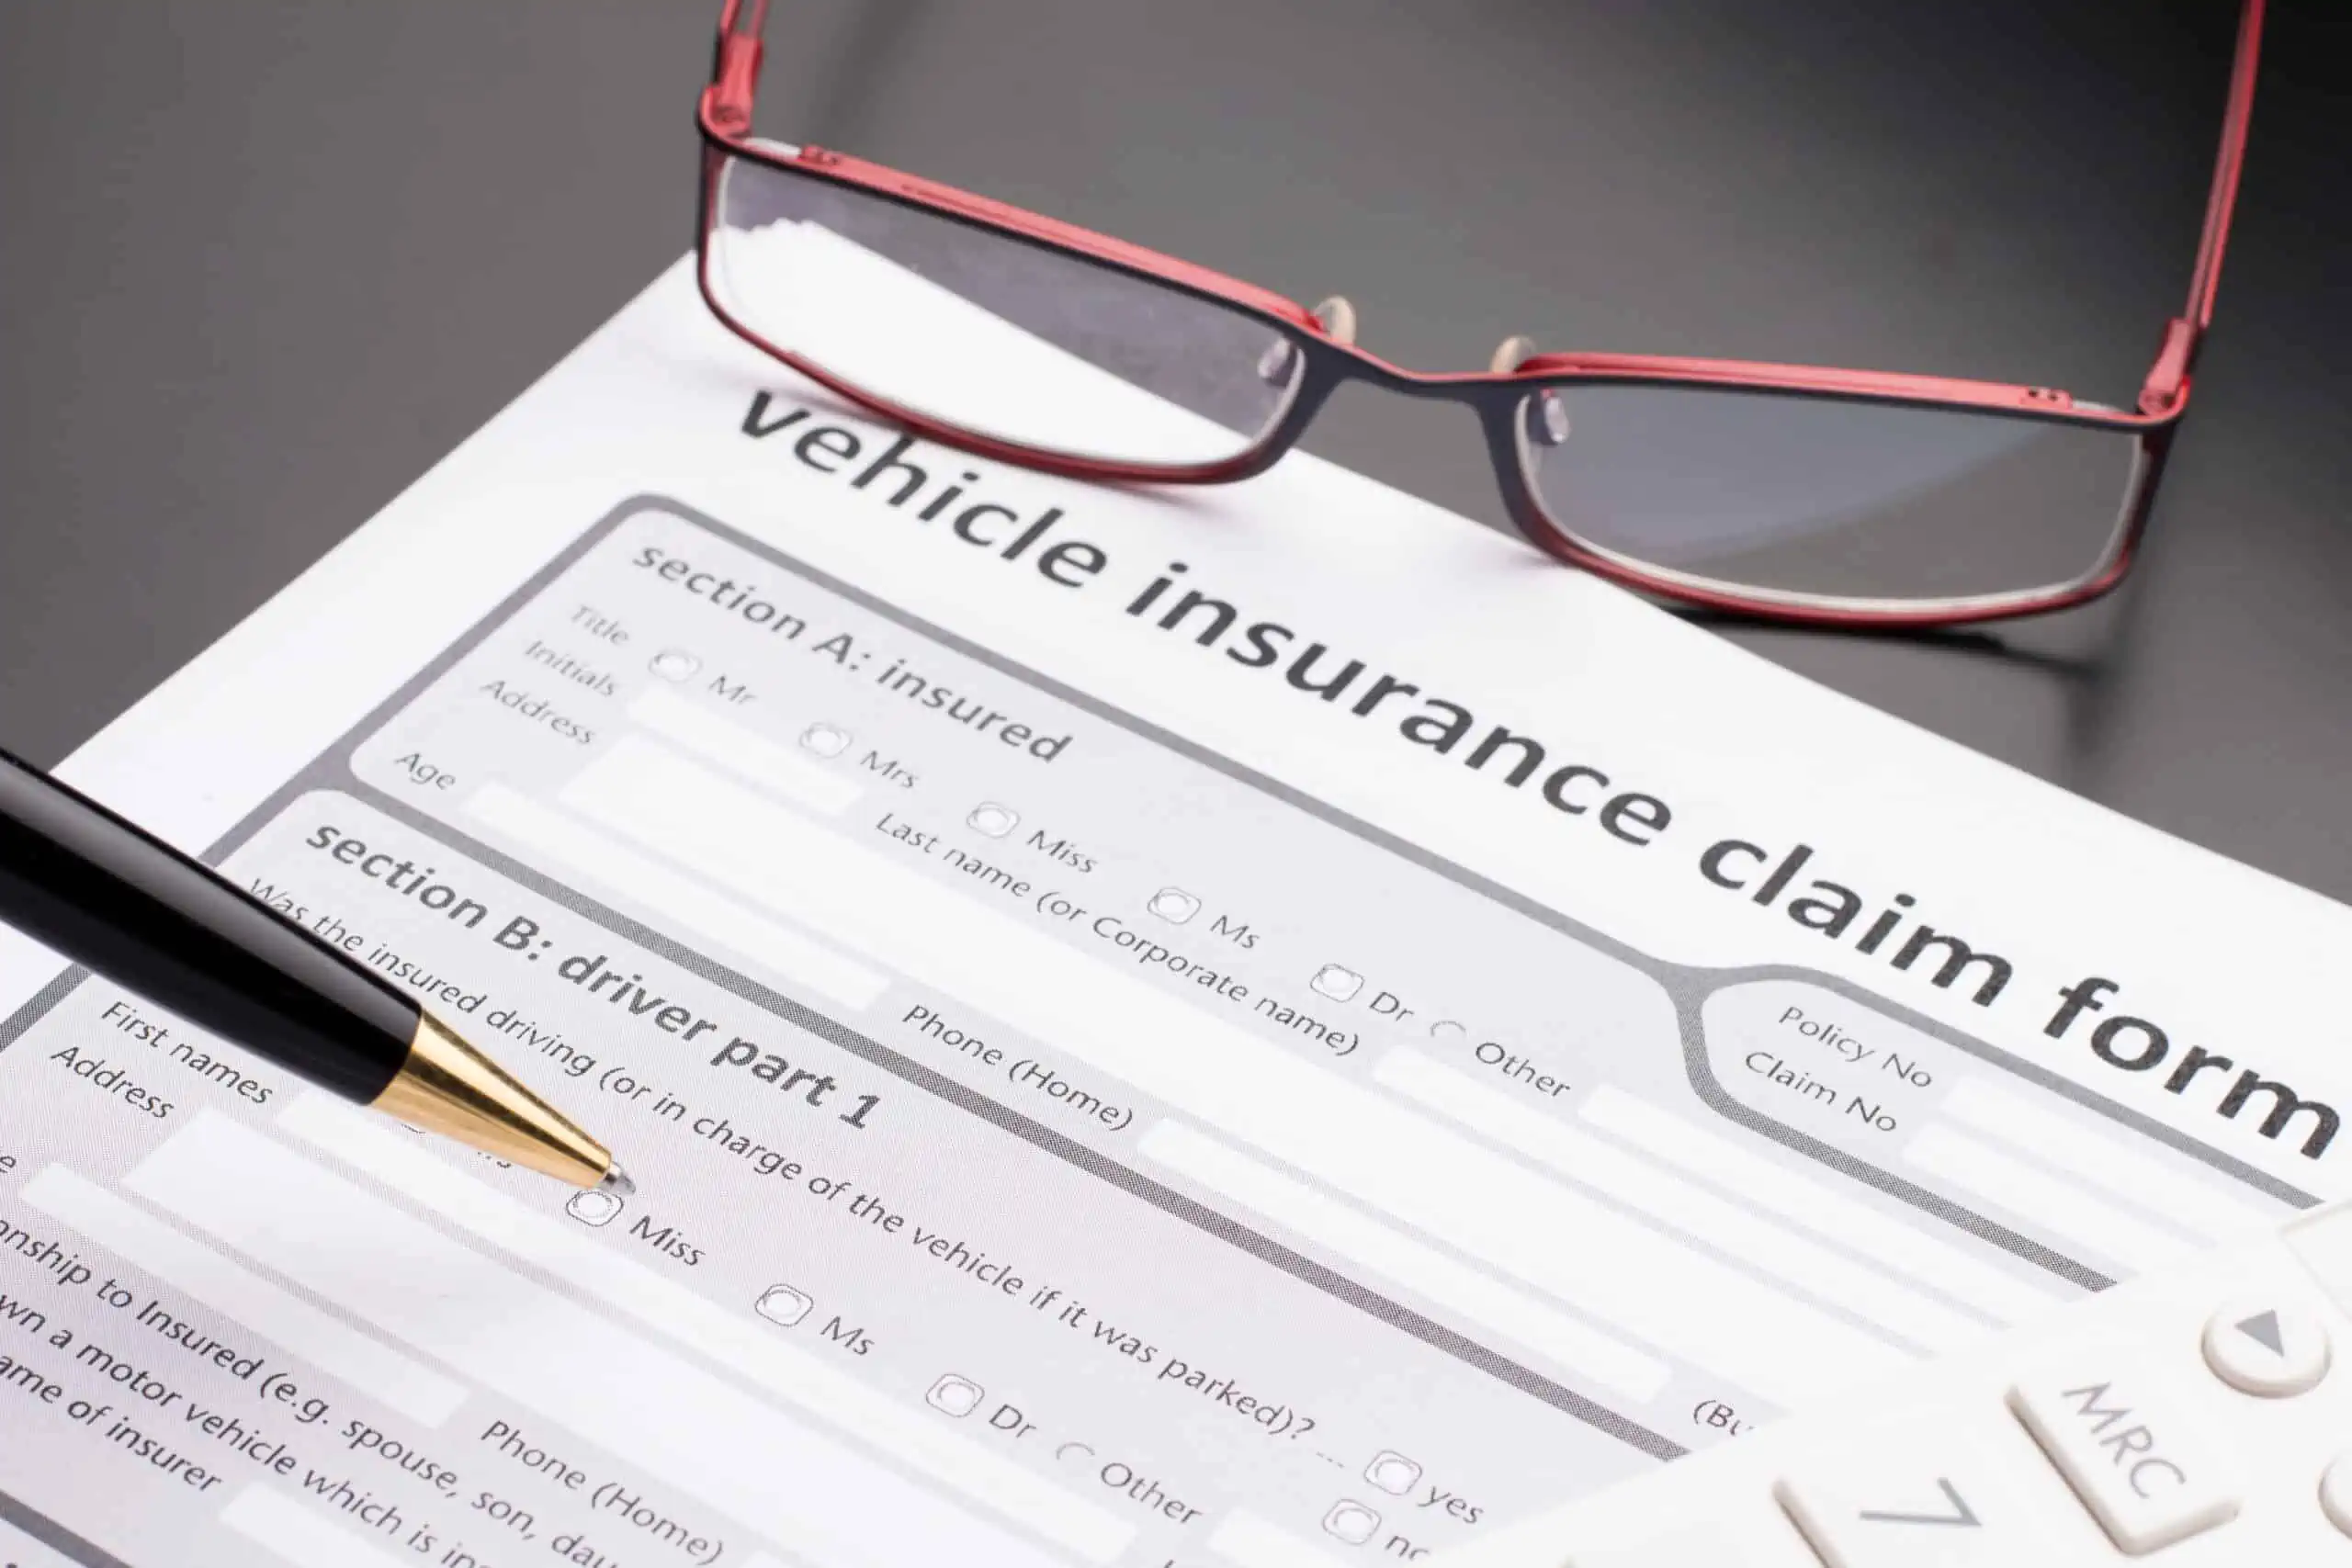 Car insurance claim form with a black lacquer ballpoint pen and red reading glasses.